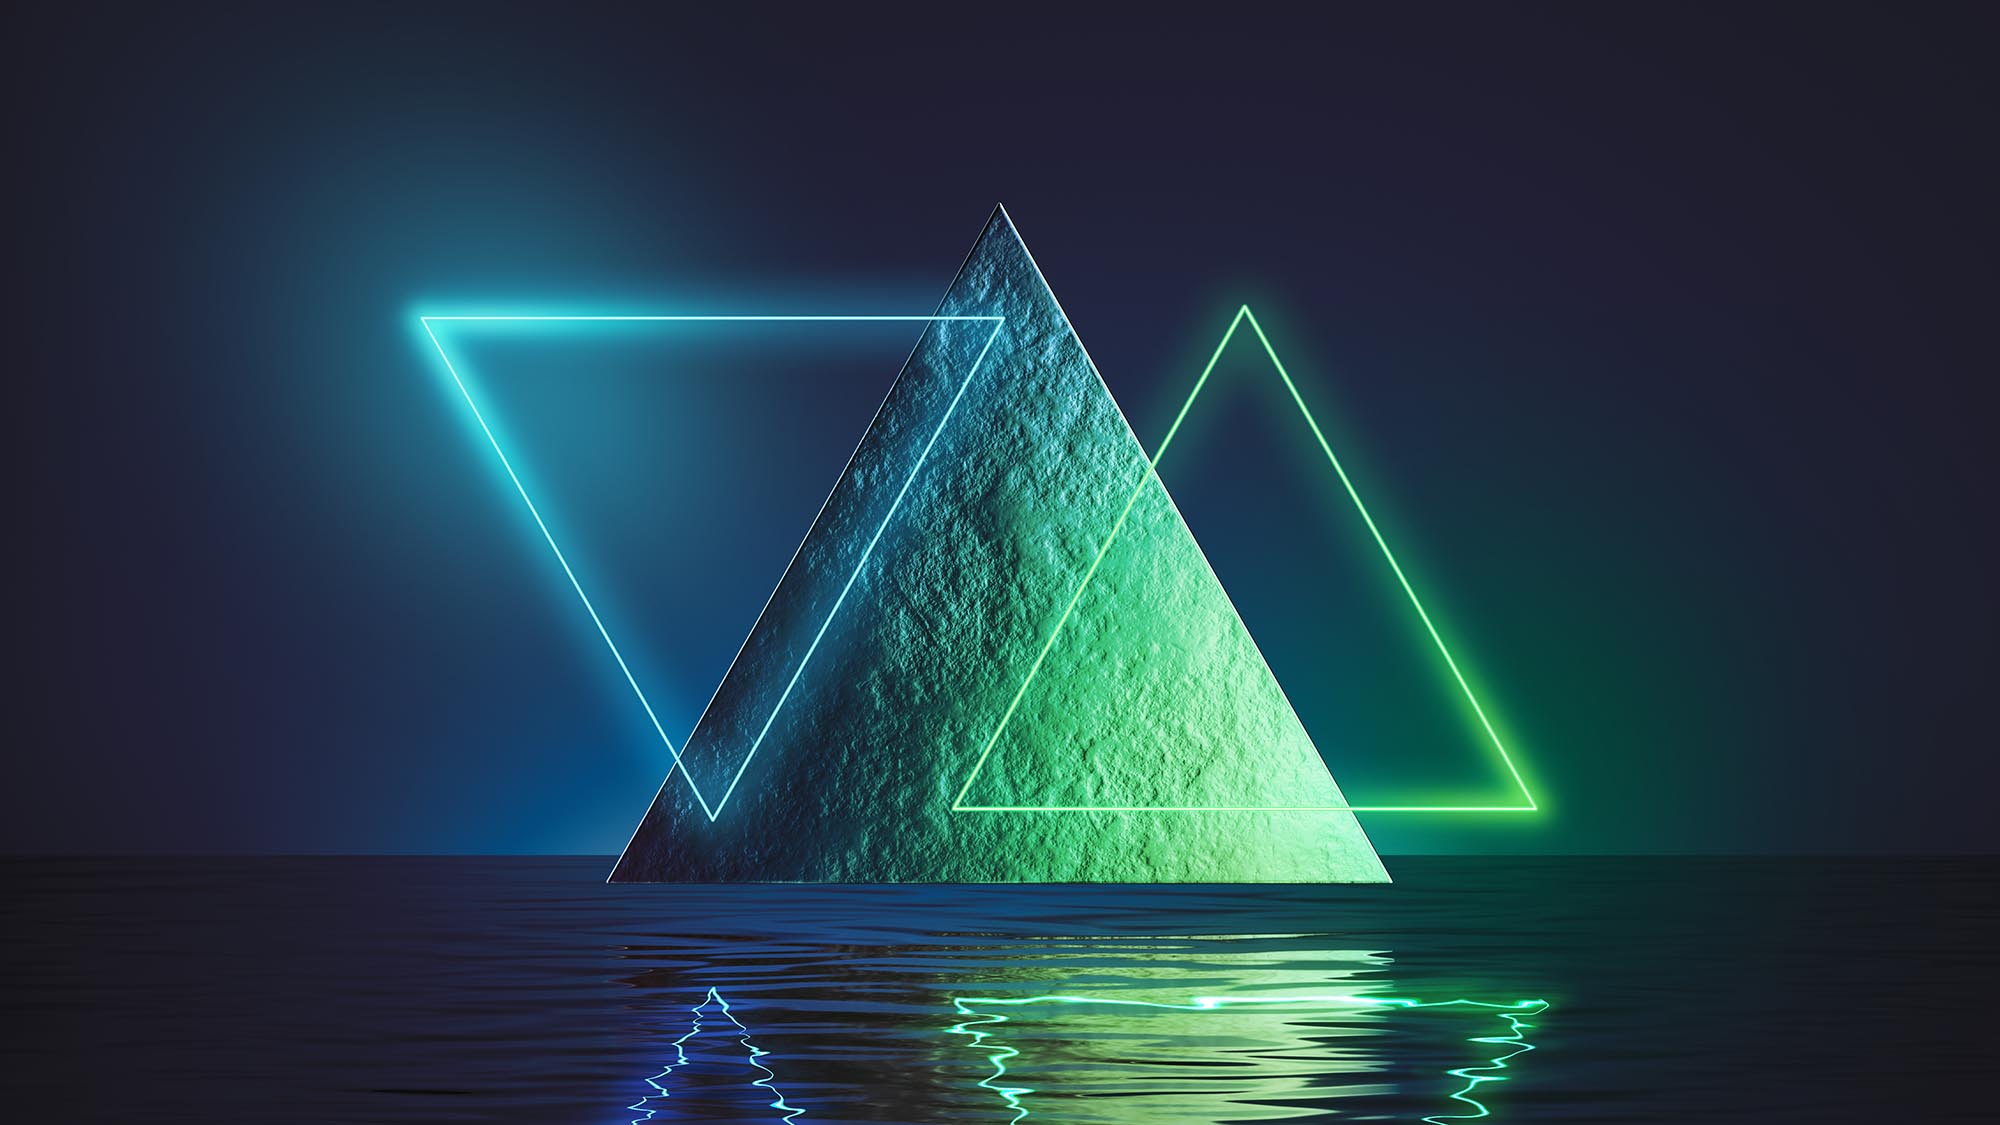 3d render, abstract minimal blue green background with neon triangular geometric shapes. Triangle levitates above the water with ripples